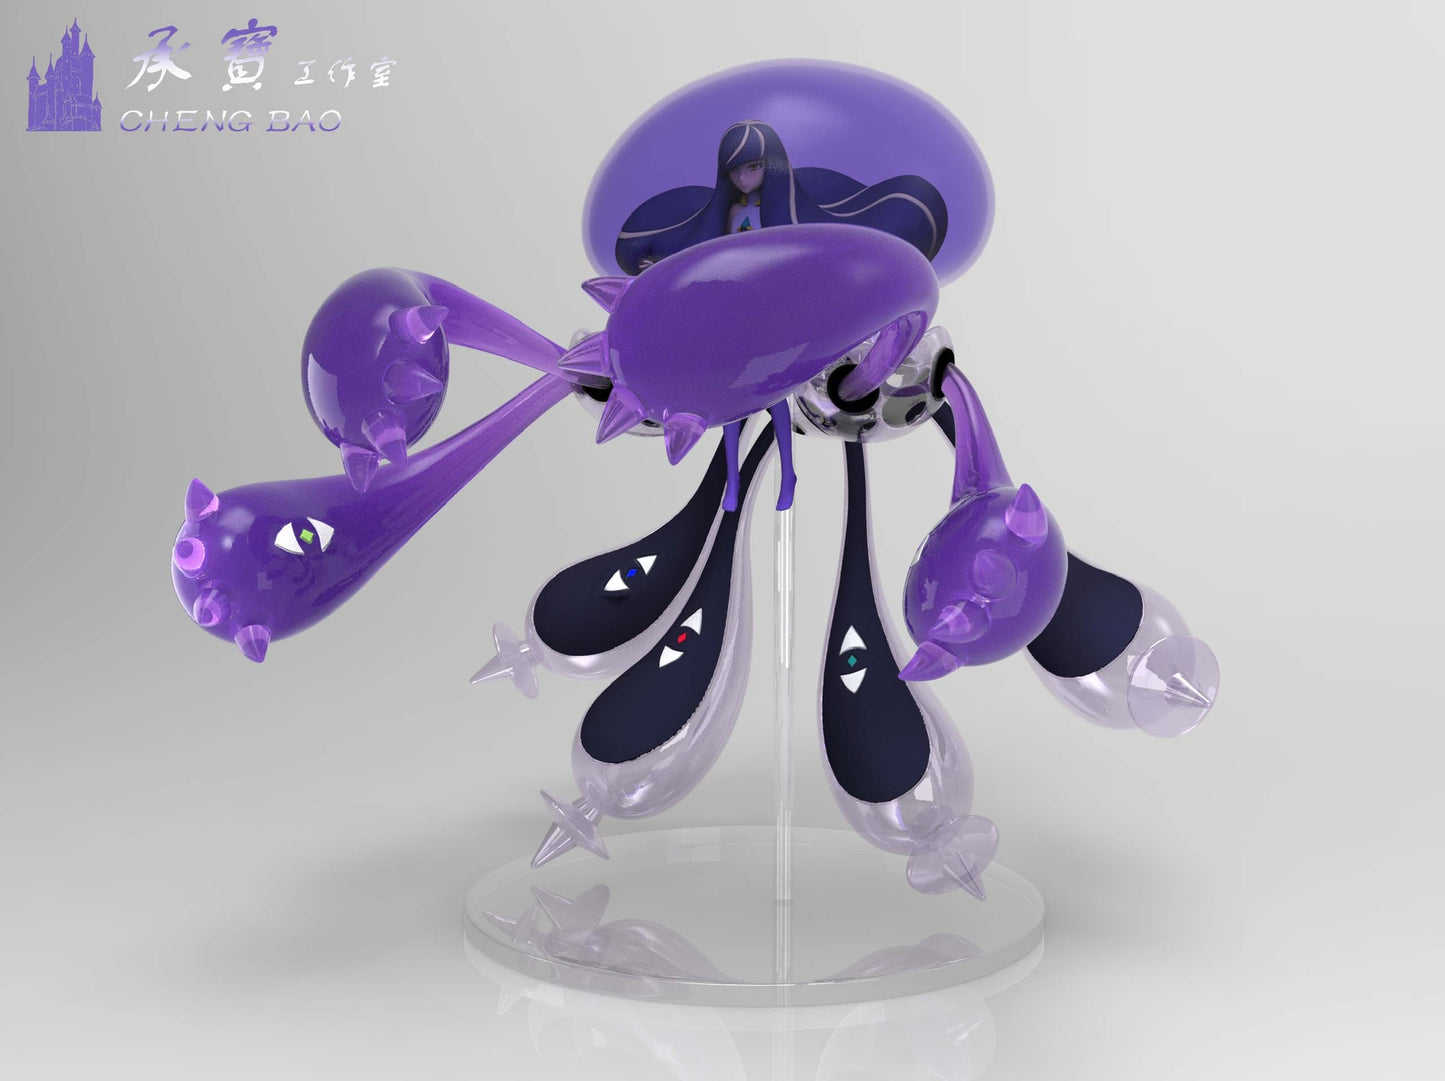 [PREORDER CLOSED] 1/20 Scale World Figure [CHENGBAO] - Lusamine merged with Nihilego